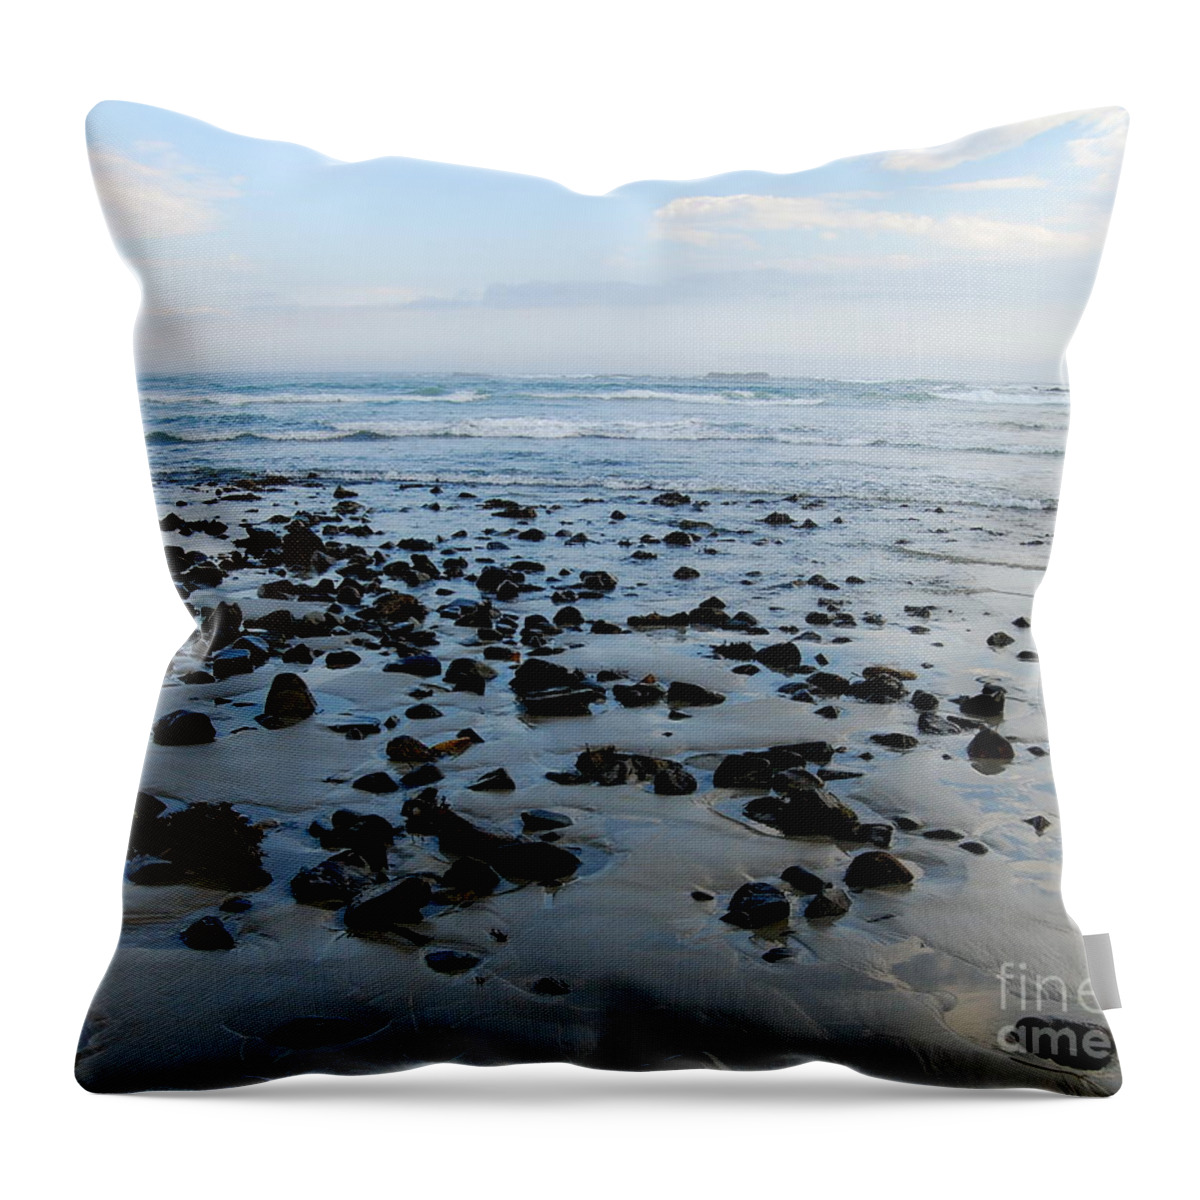 Maine Landscape Throw Pillow featuring the photograph Maine Beach Landscape by Eunice Miller